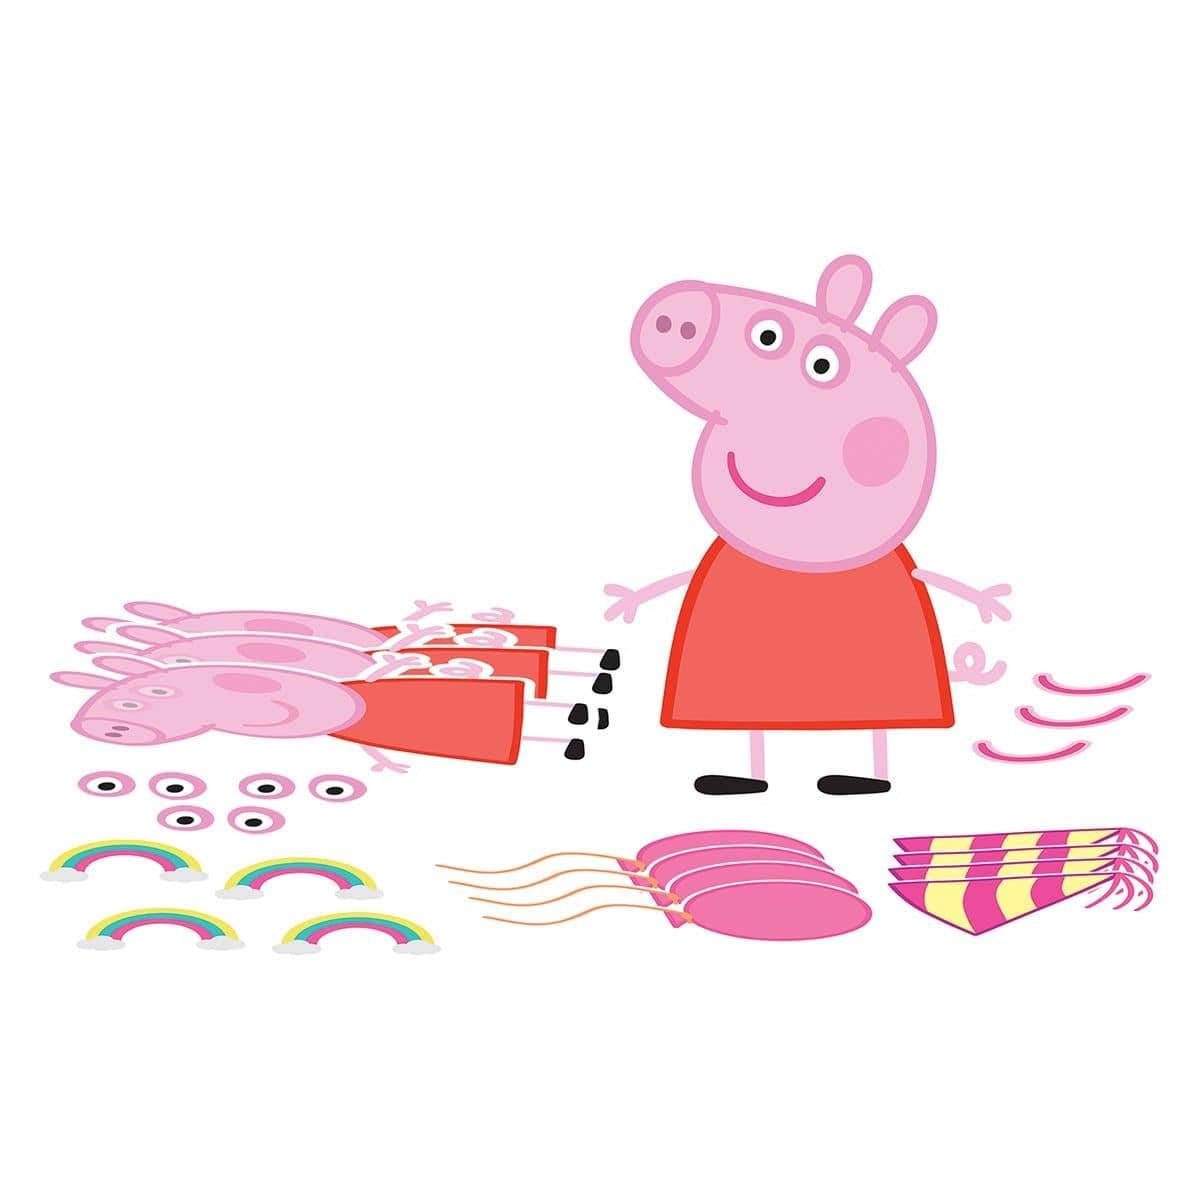 Buy Kids Birthday Peppa Pig Confetti Craft Kit sold at Party Expert